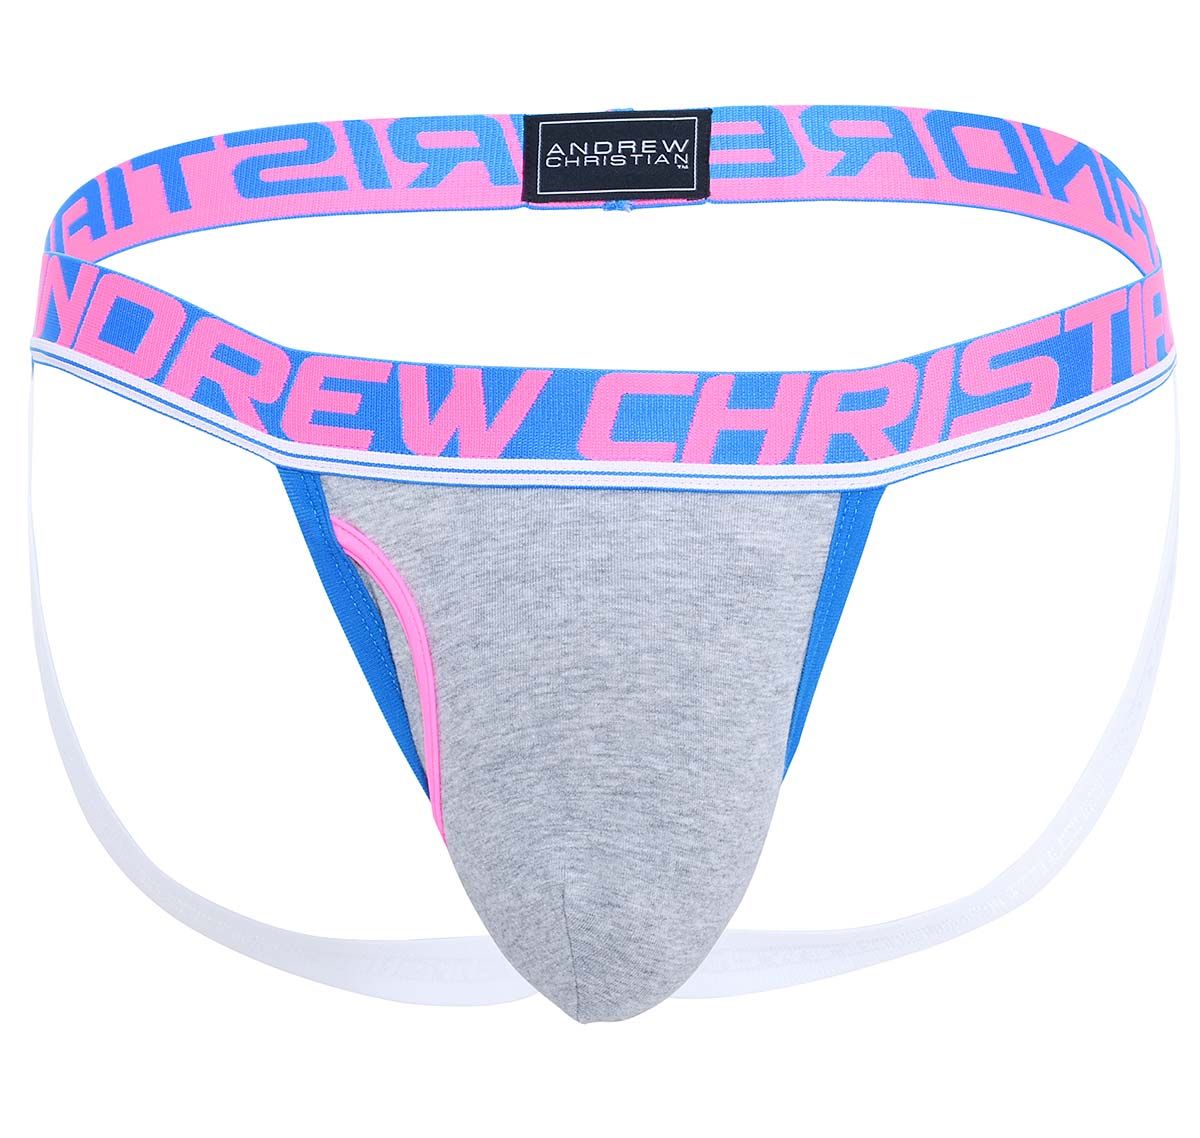 Andrew Christian Suspensorio FLY JOCK w/ Almost Naked 91742, gris